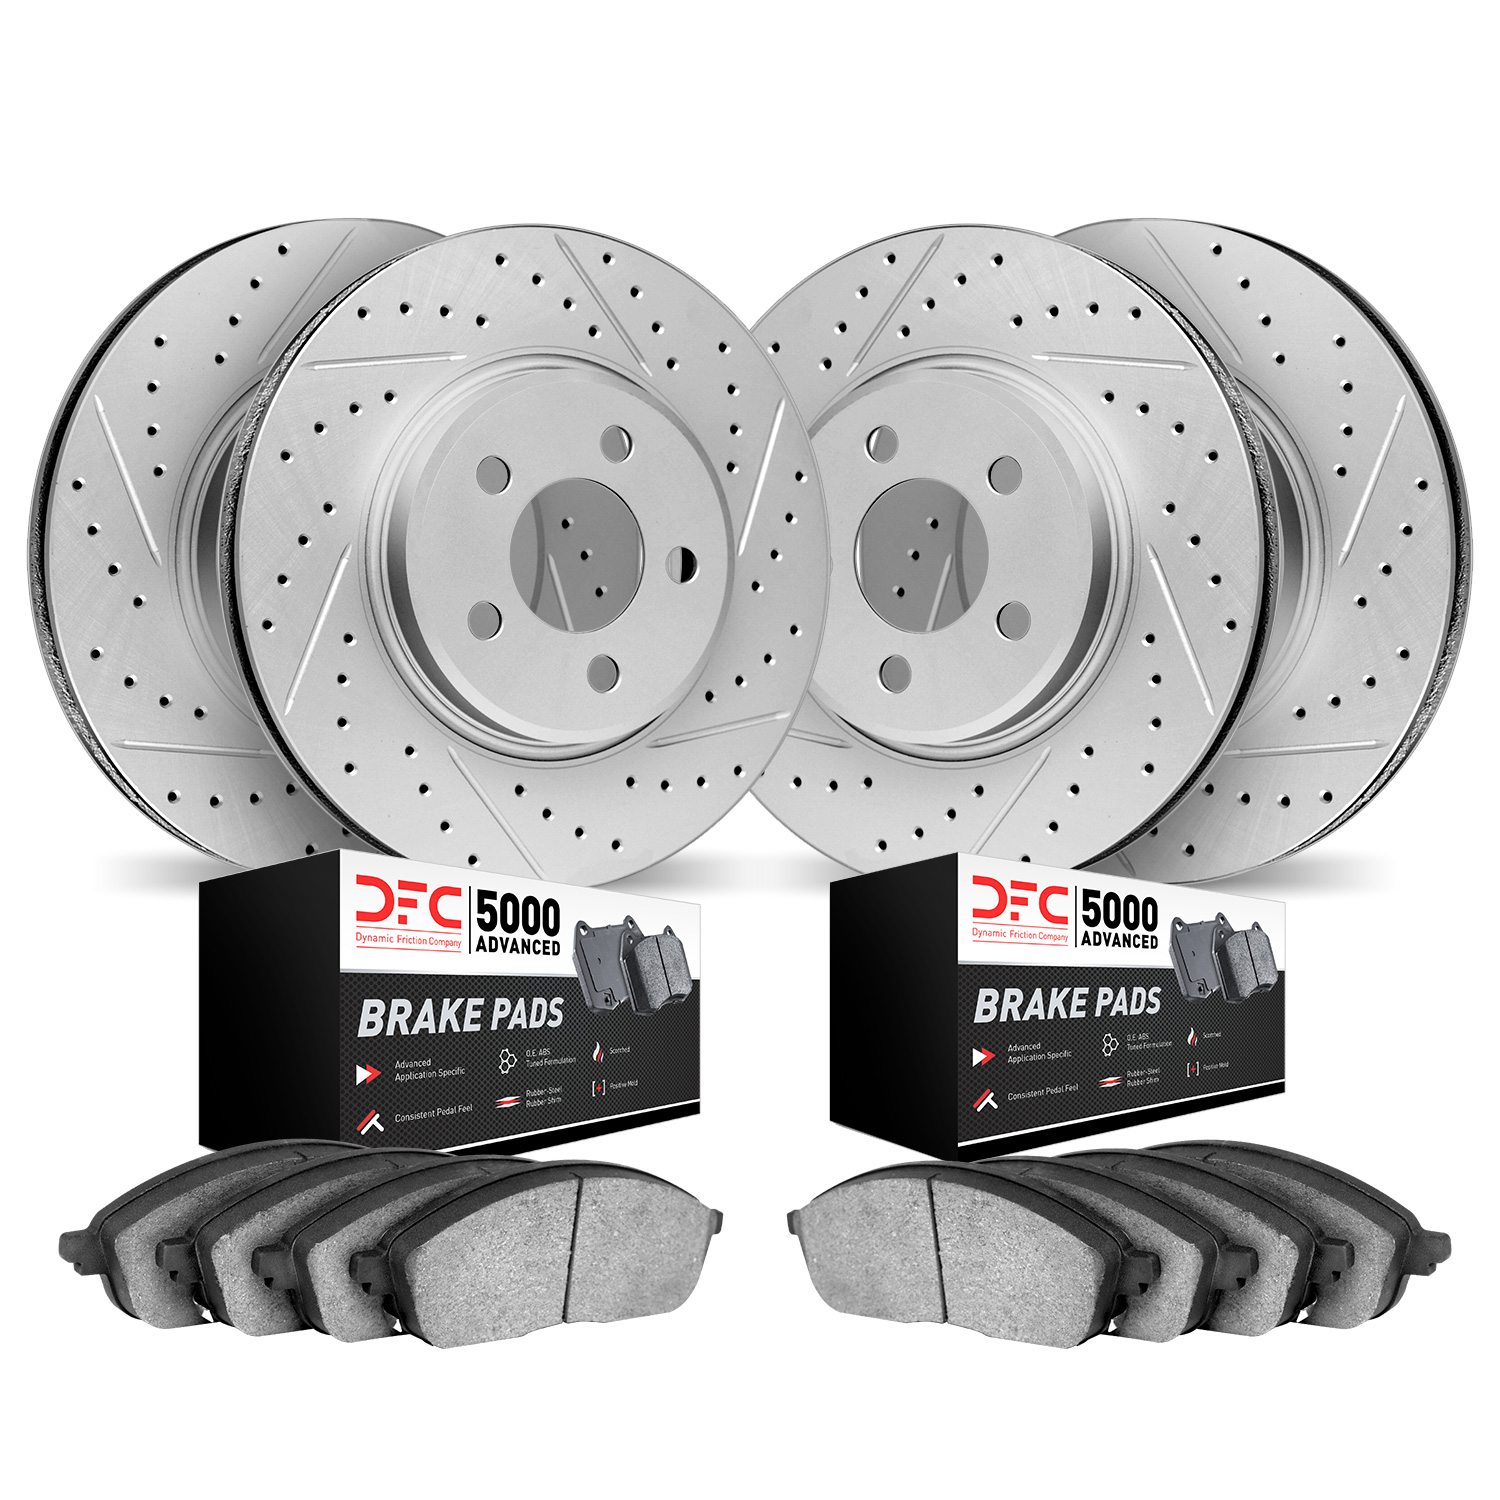 2504-31035 Geoperformance Drilled/Slotted Rotors w/5000 Advanced Brake Pads Kit, 2011-2016 BMW, Position: Front and Rear